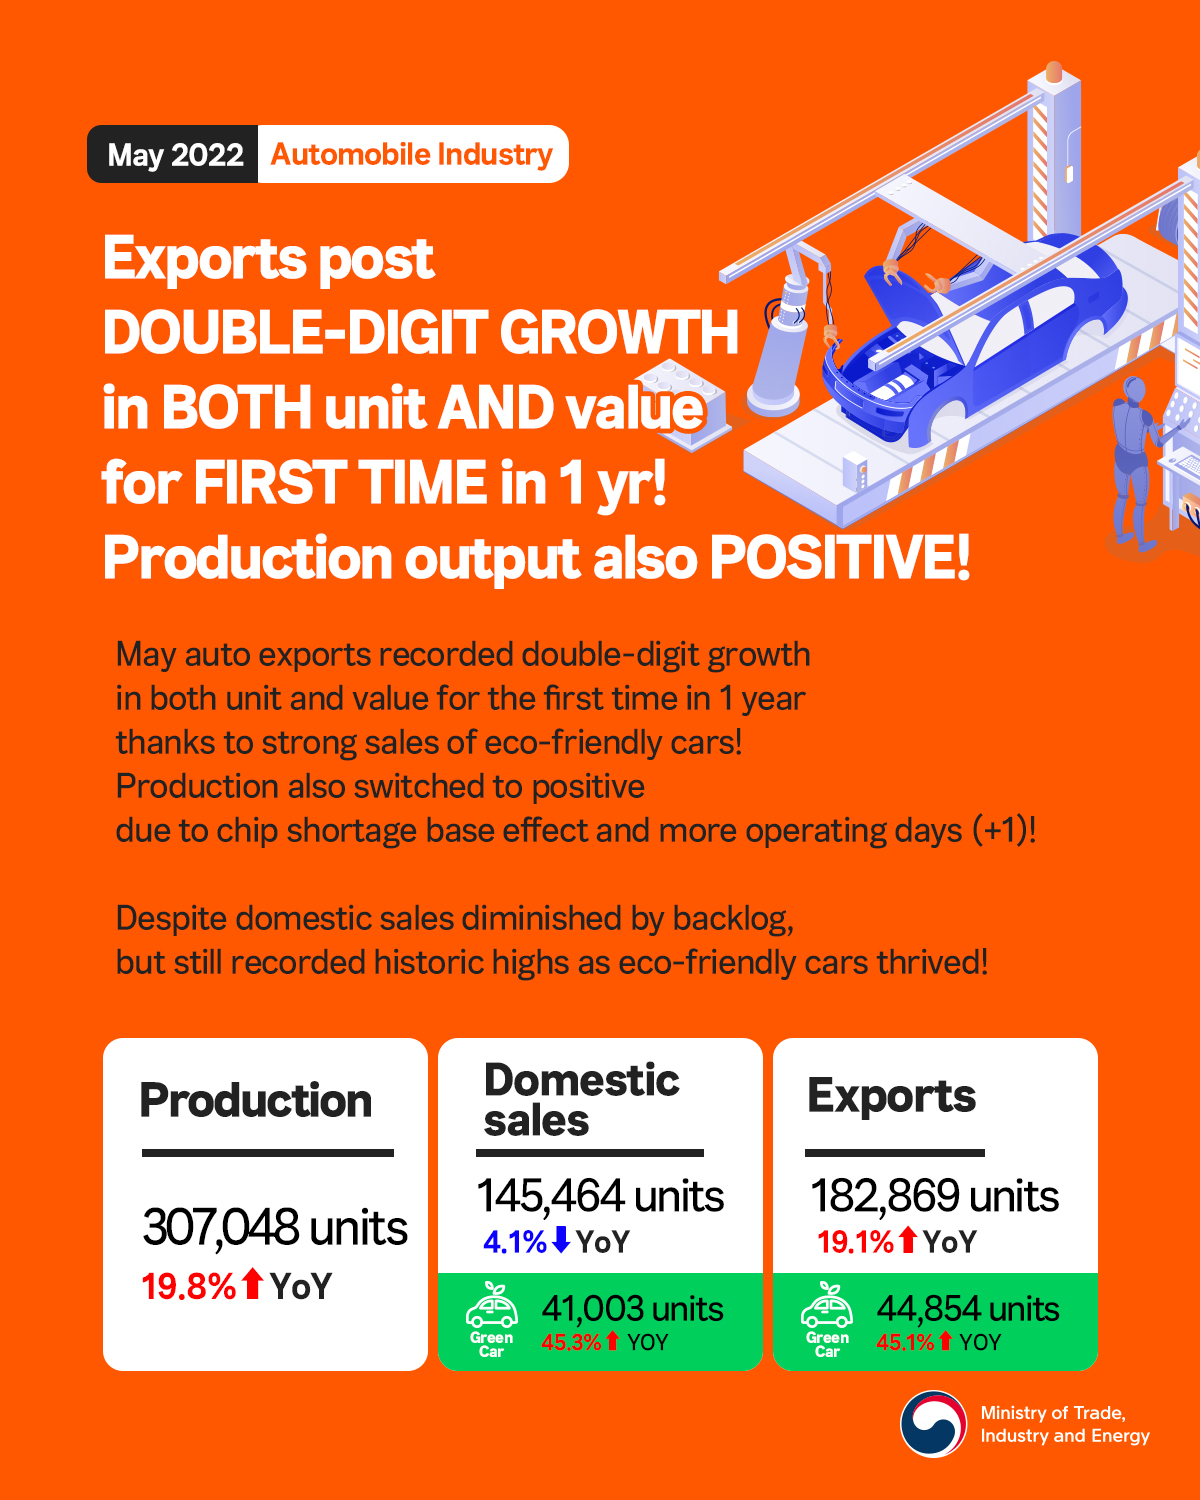 Korea's auto exports regain double-digit growth after 1 year! Image 0